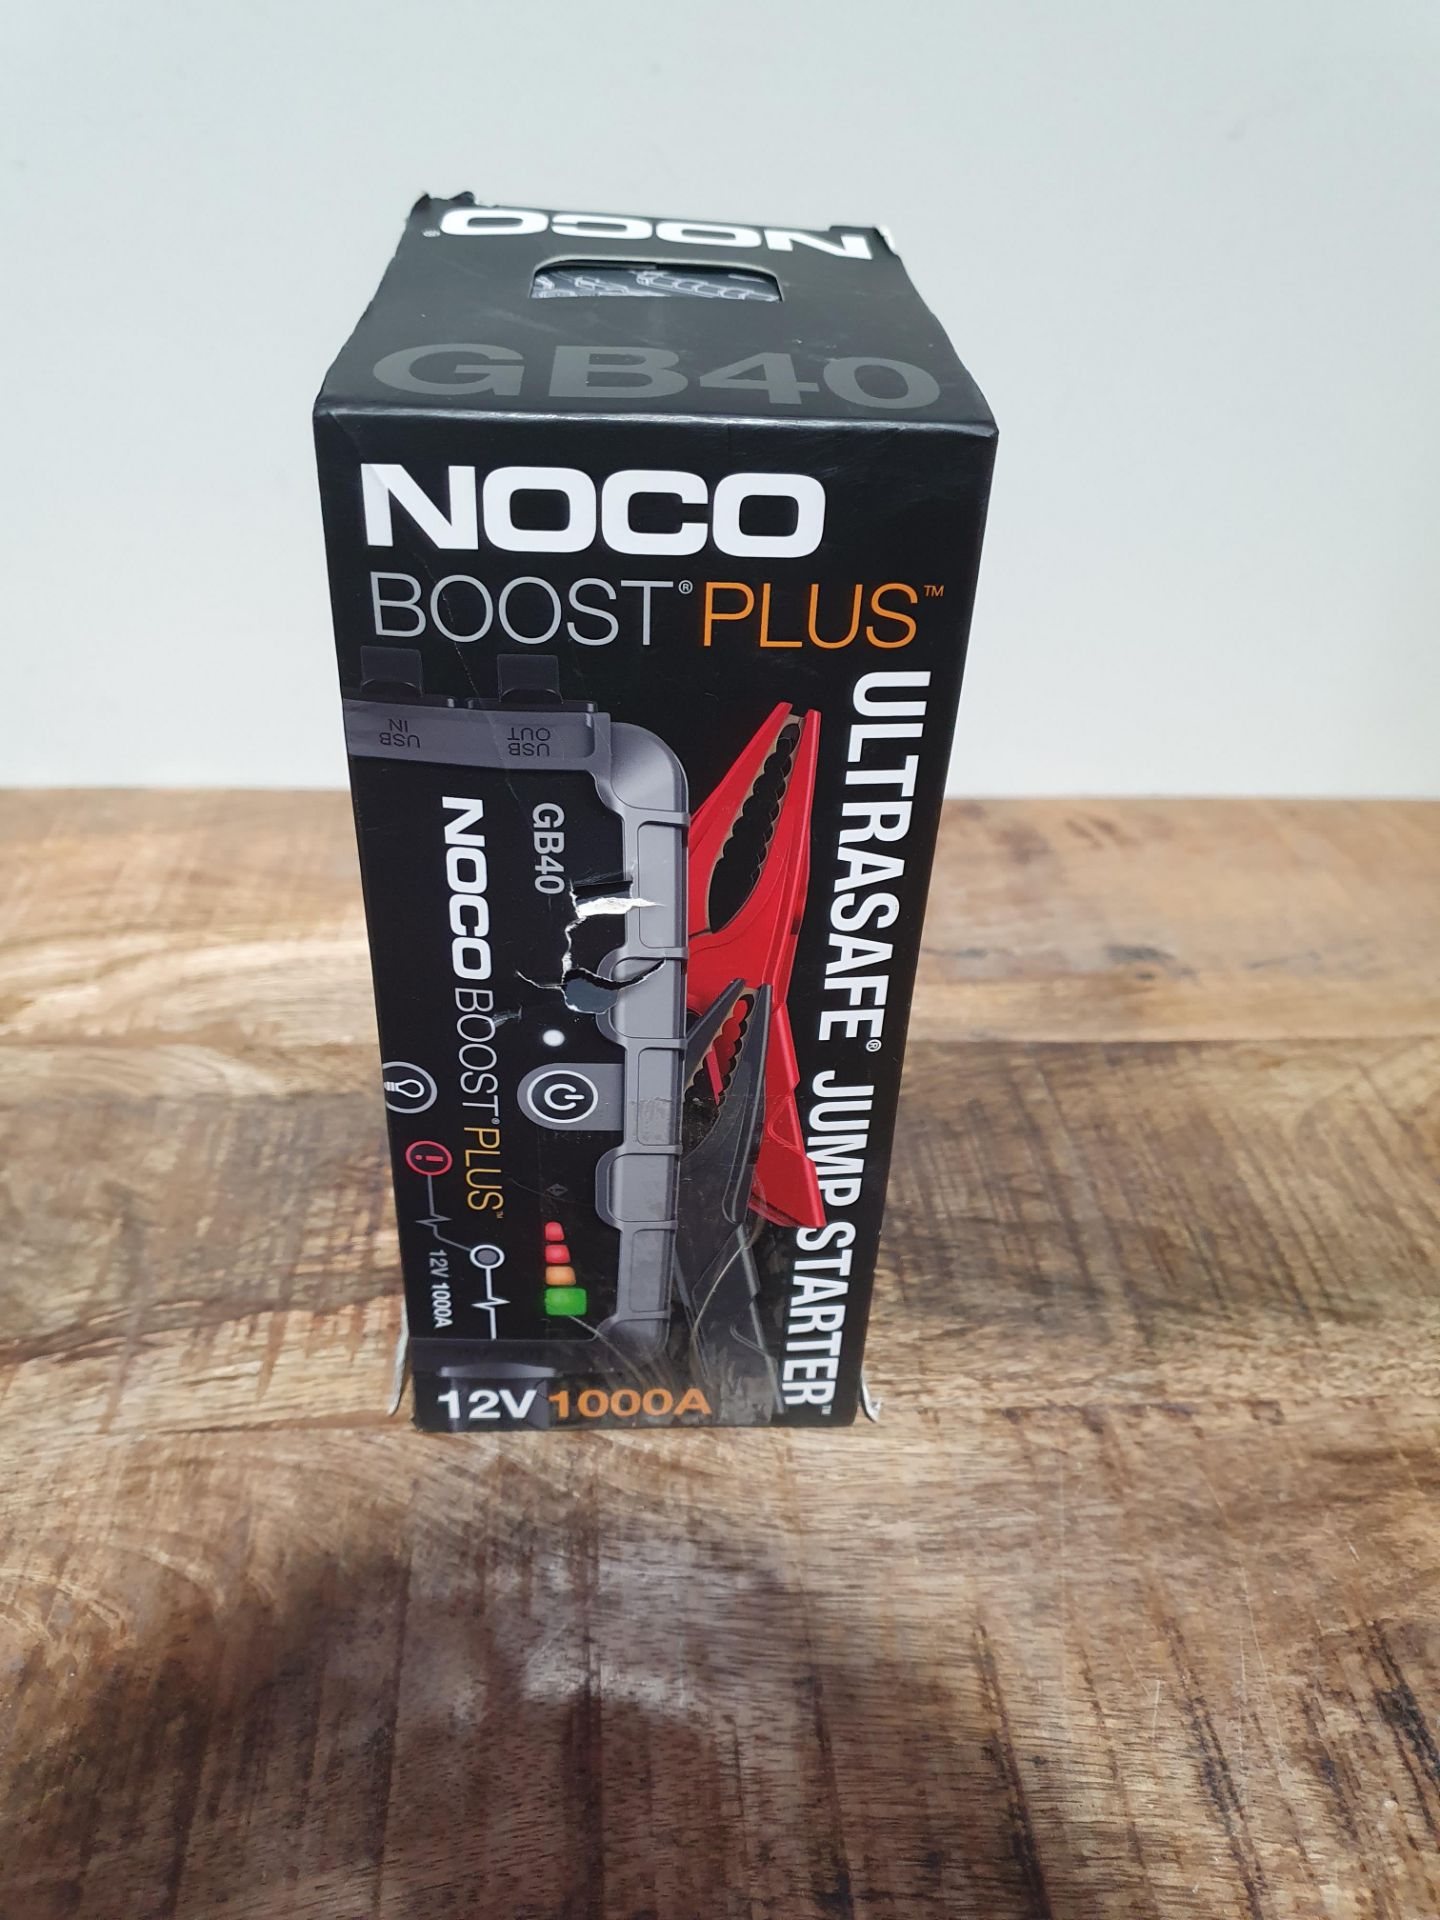 NOCO BOOST PLUS GB 40 ULTRASAFE JUMP STARTER RRP £99Condition ReportAppraisal Available on Request -